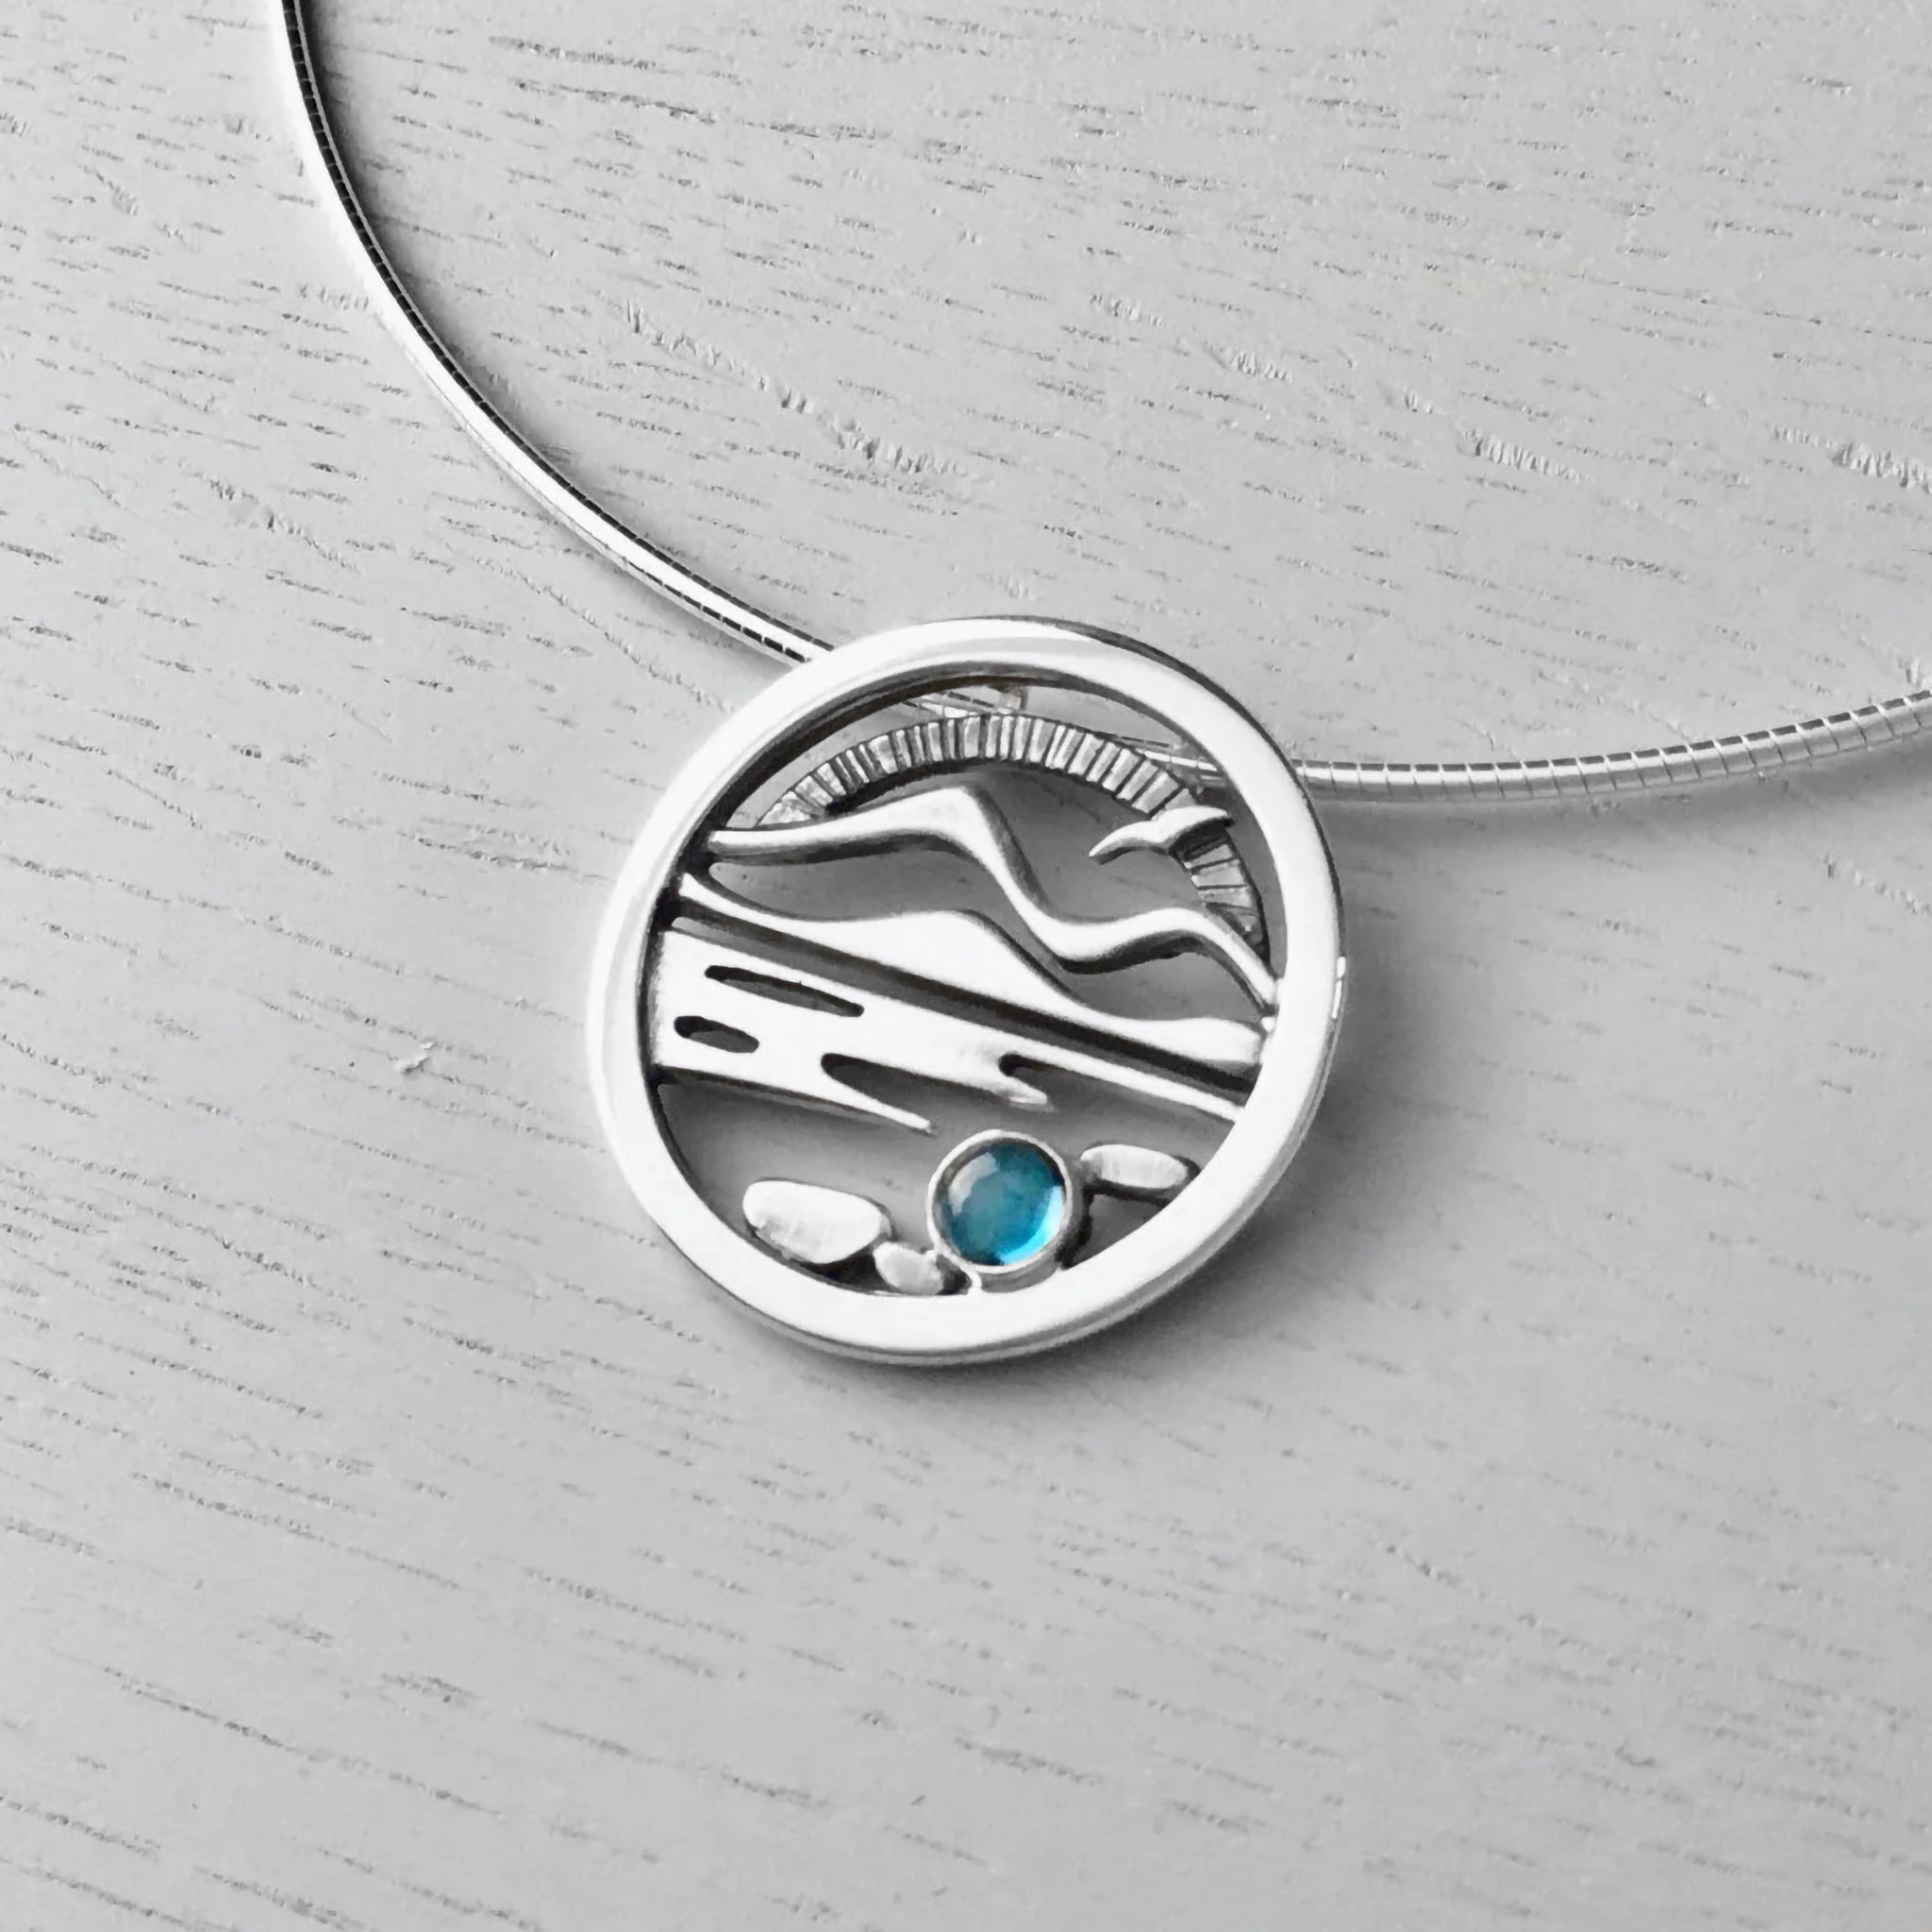 A round necklet featuring a Highland scene with water, Munros, a bird and a blue topaz stone